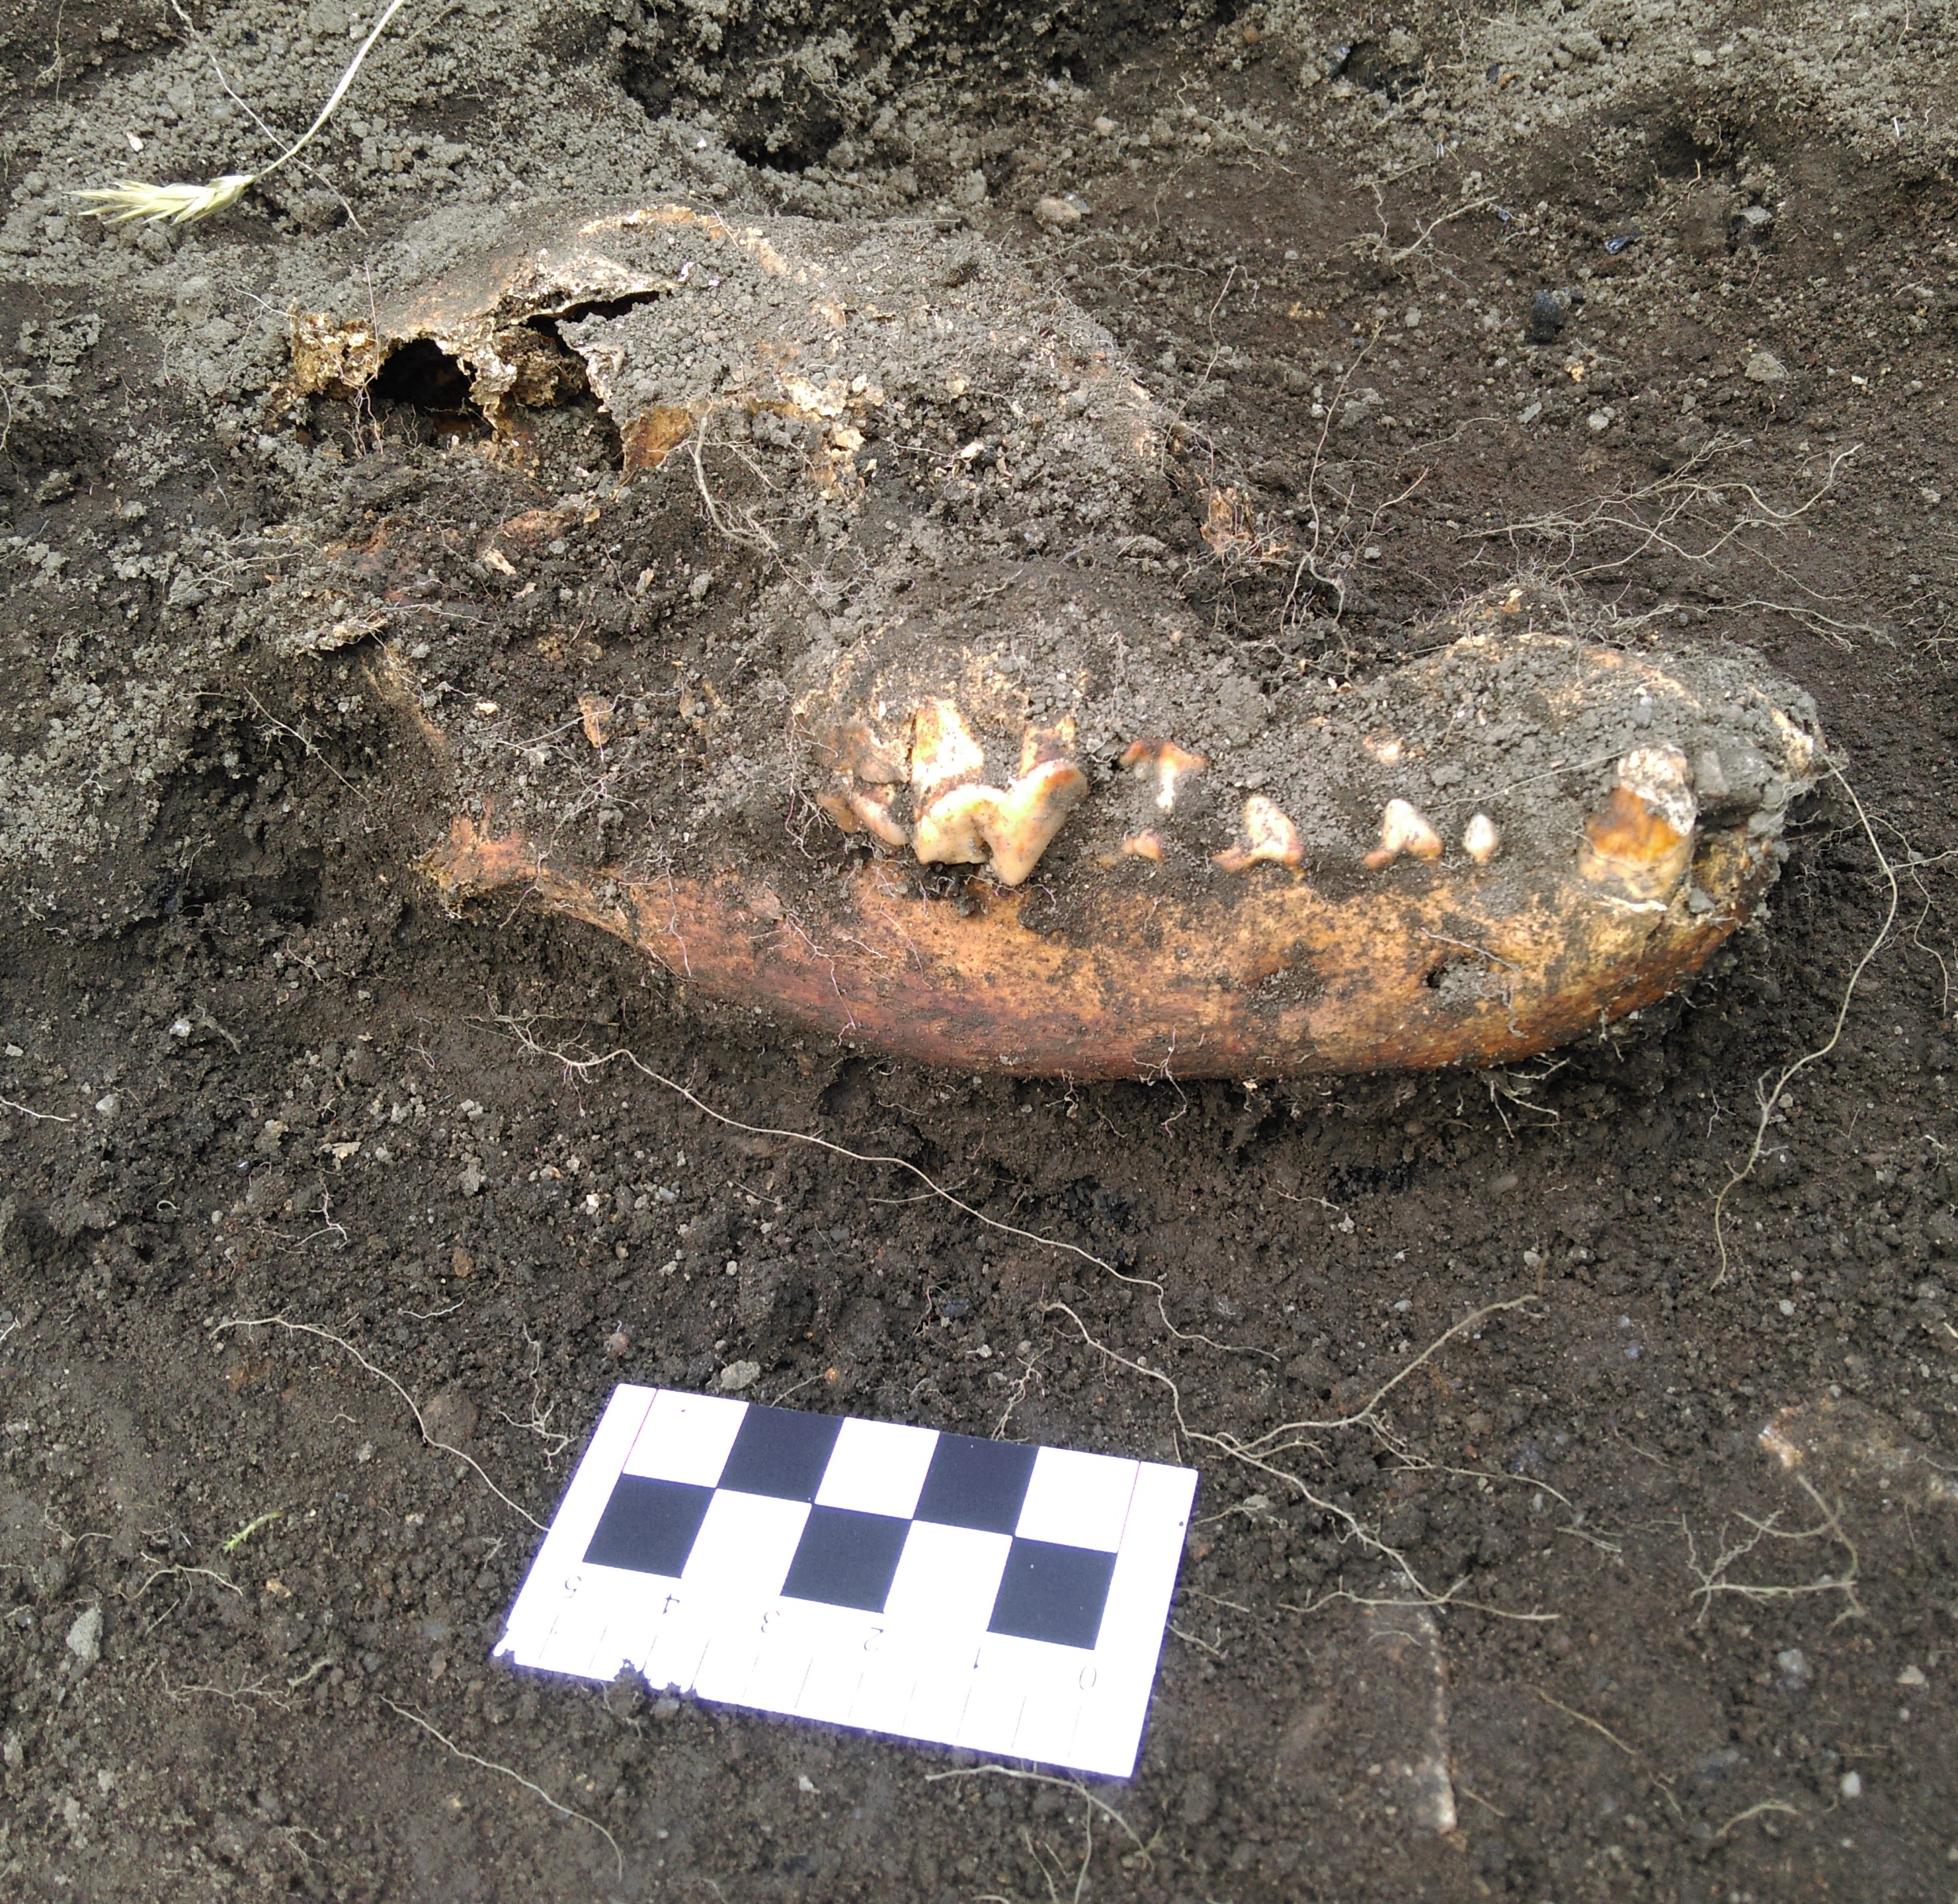 Canine skull, probably a sheep dog, possibly something a little more combative.